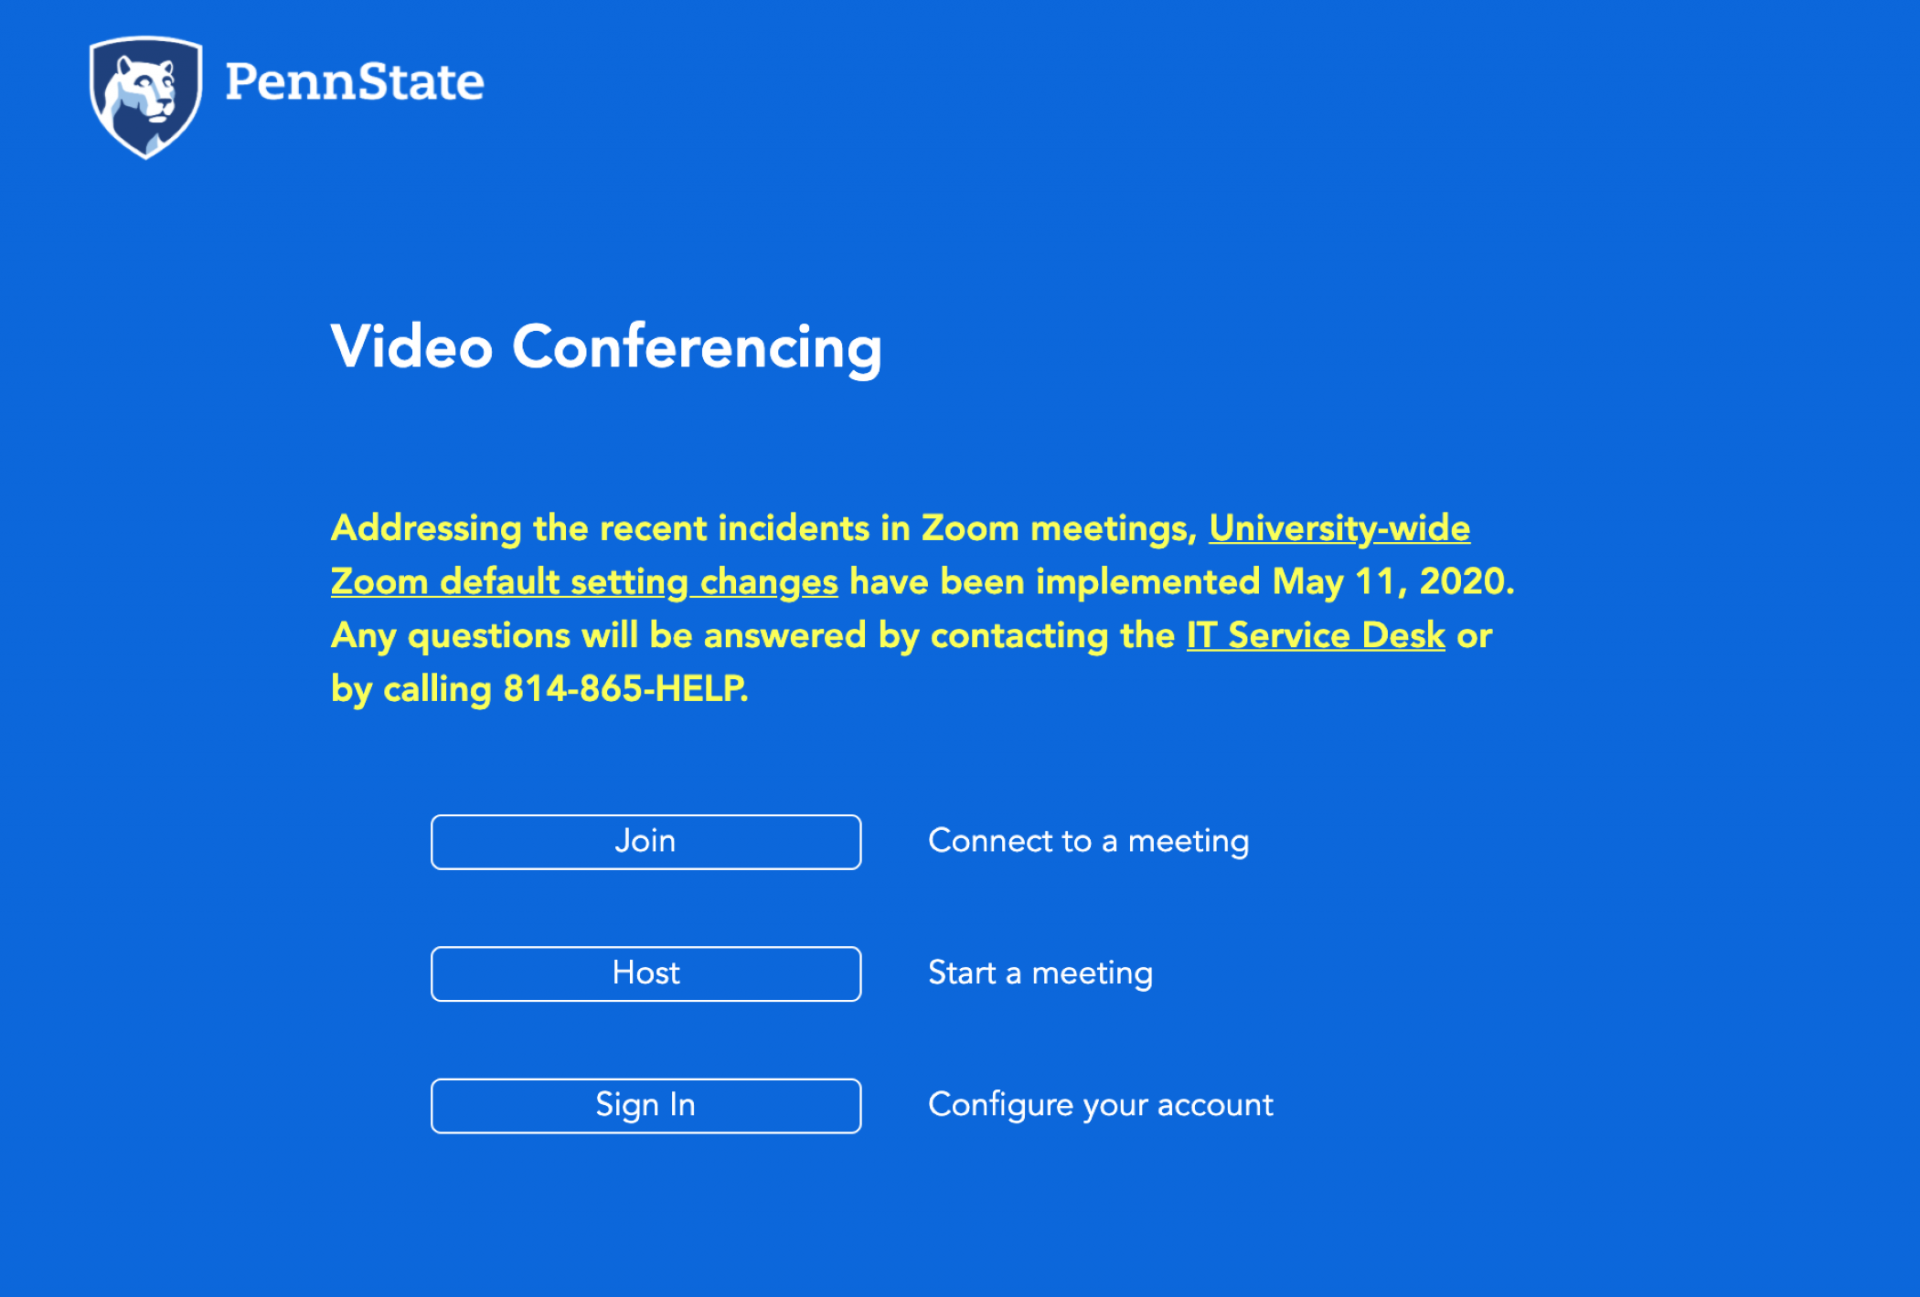 The default settings for meetings using the Zoom platform at Penn State have been changed to help prevent 'Zoom-bombing,' when bad actors take over Zoom meetings.